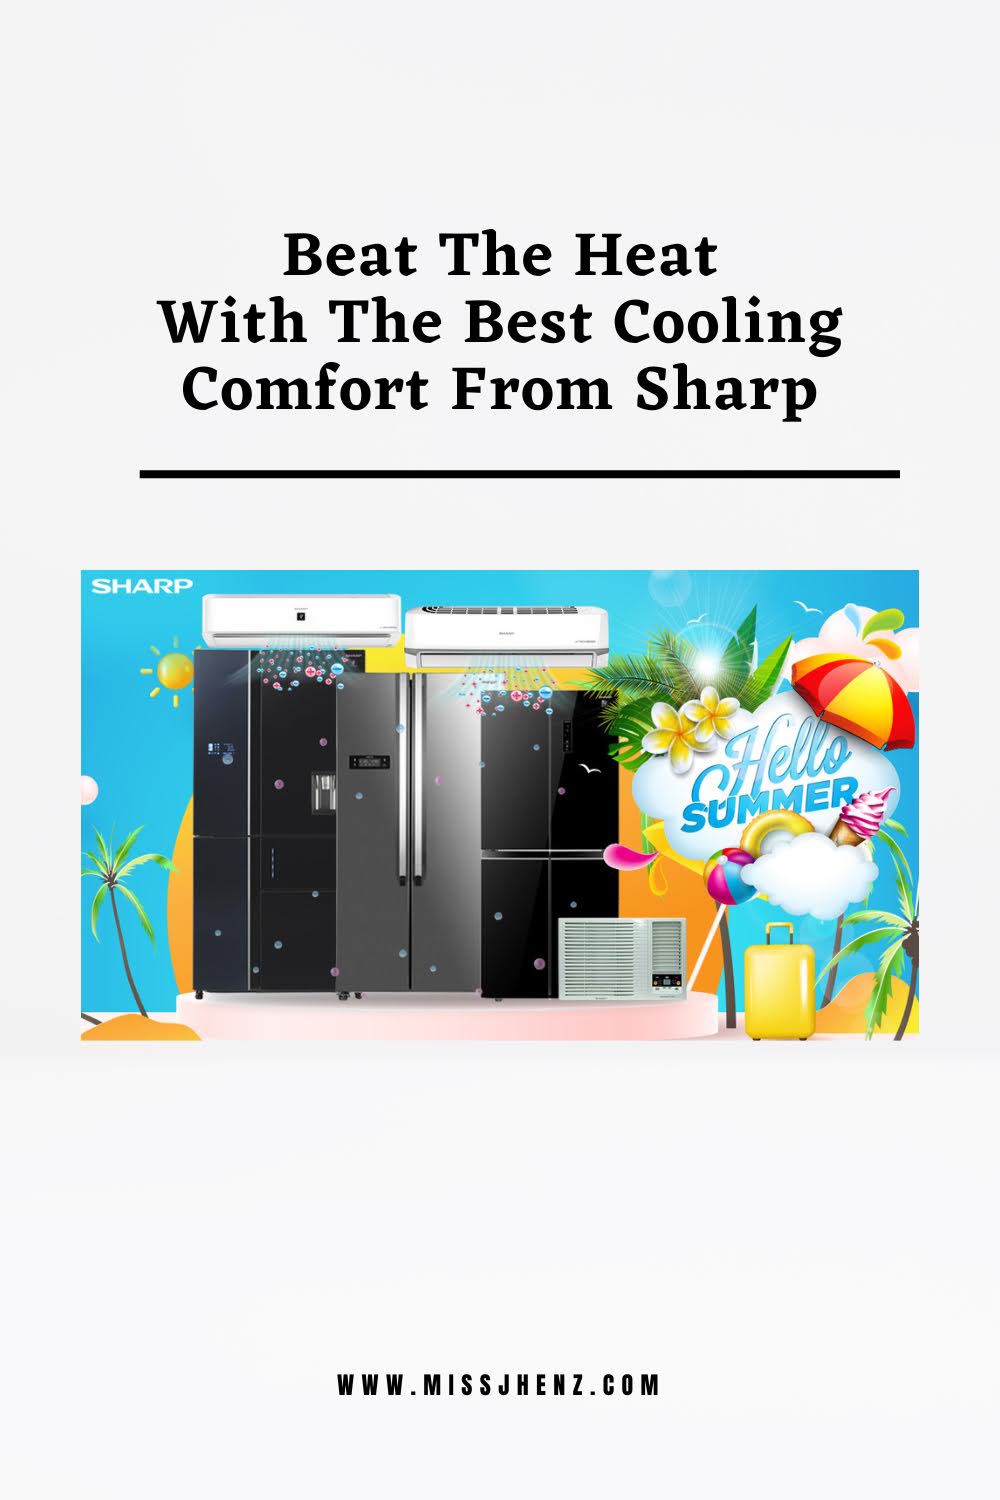 Beat The Heat With The Best Cooling Comfort From Sharp